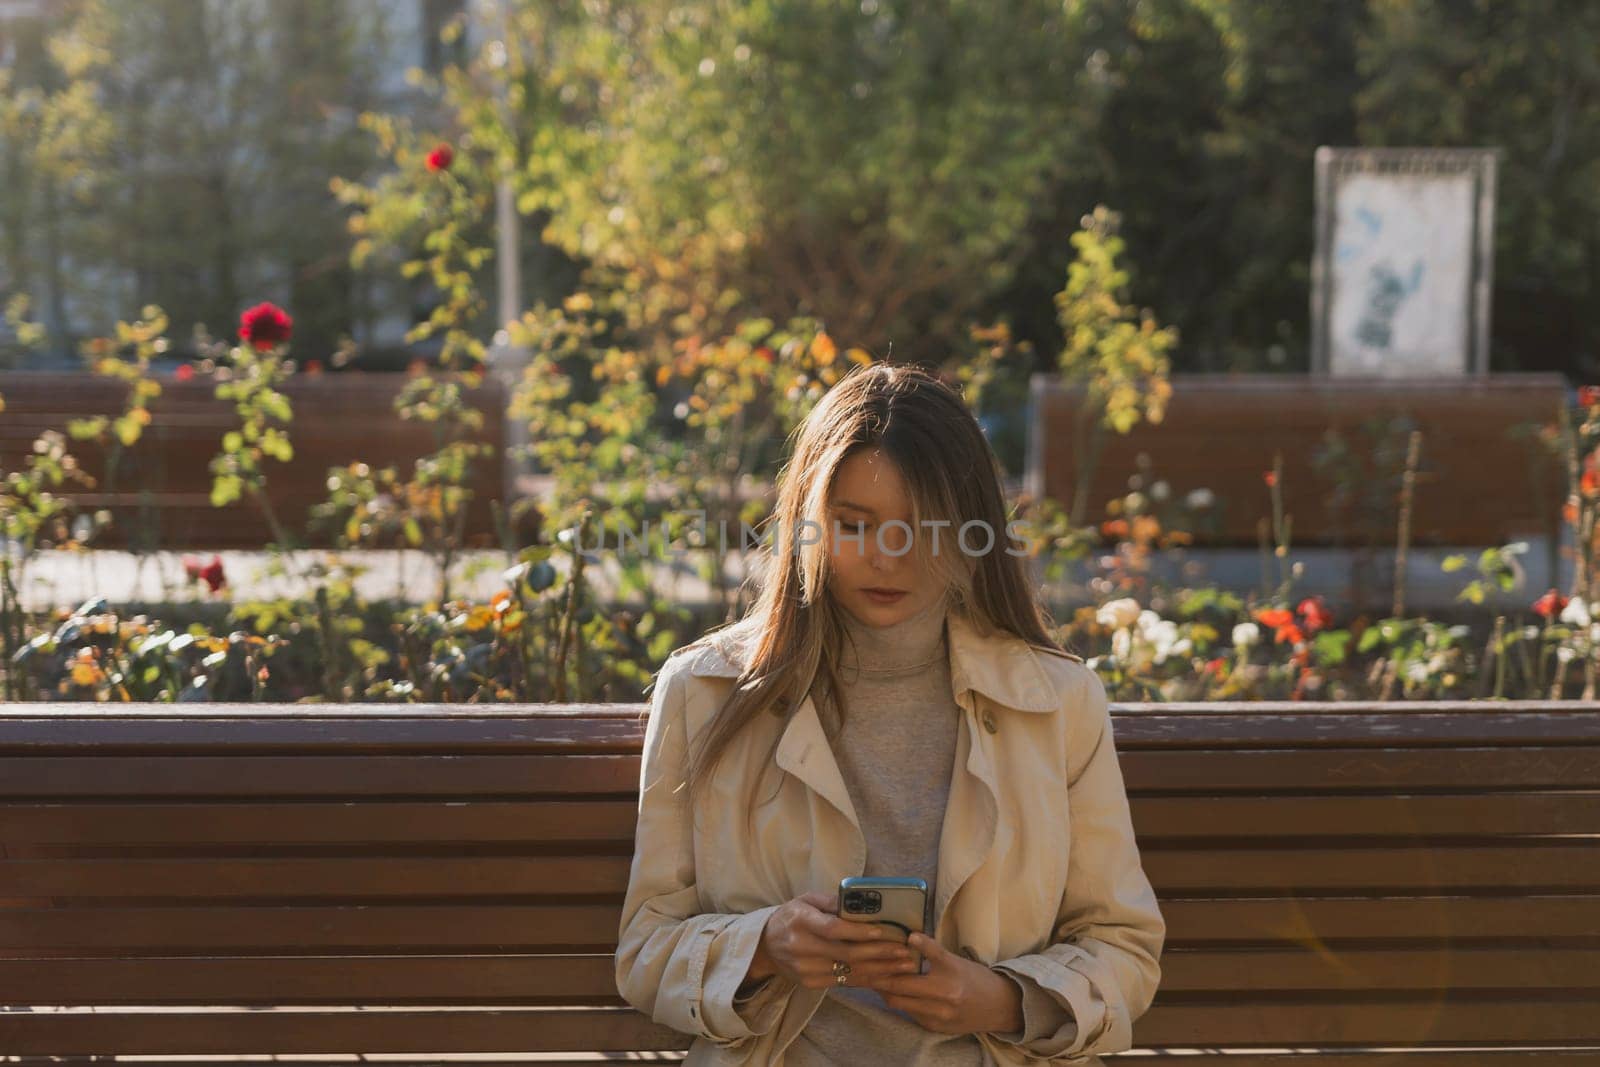 A woman is sitting on a bench and looking at her cell phone. She is wearing a tan coat and she is focused on her phone